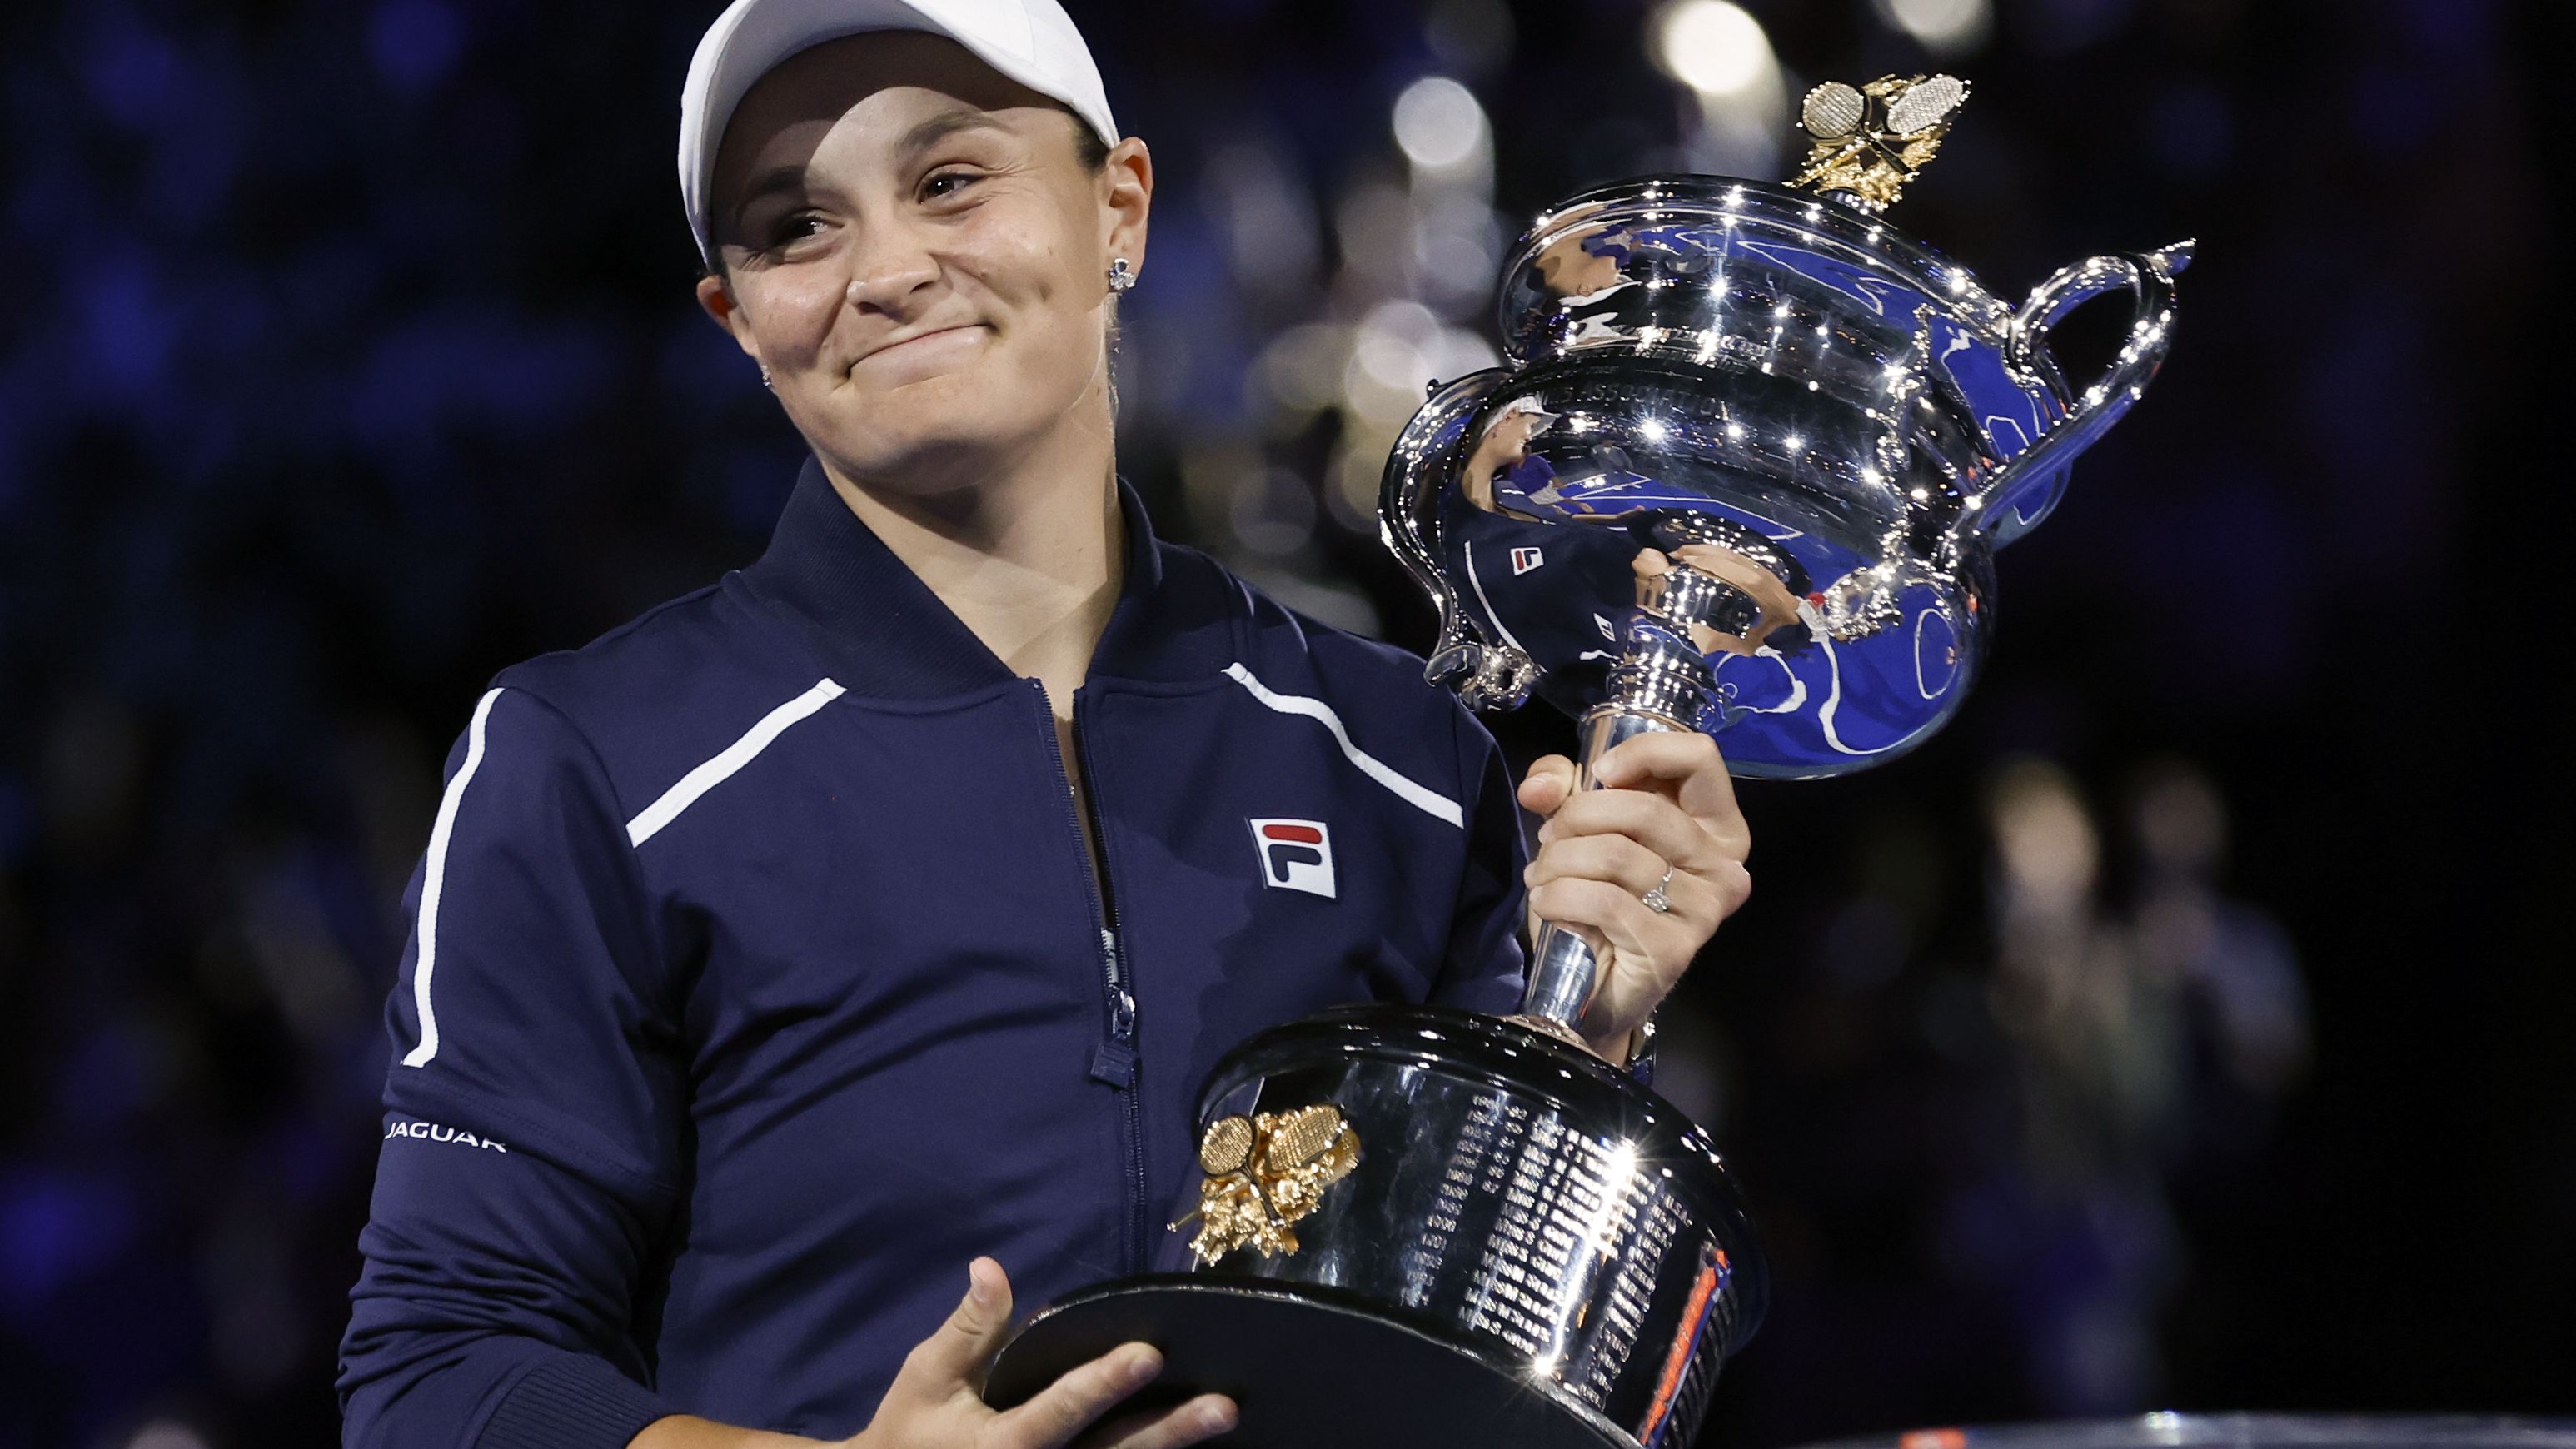 EXCLUSIVE: Tennis will miss 'beauty and artistry' of Ash Barty, says Sam Smith